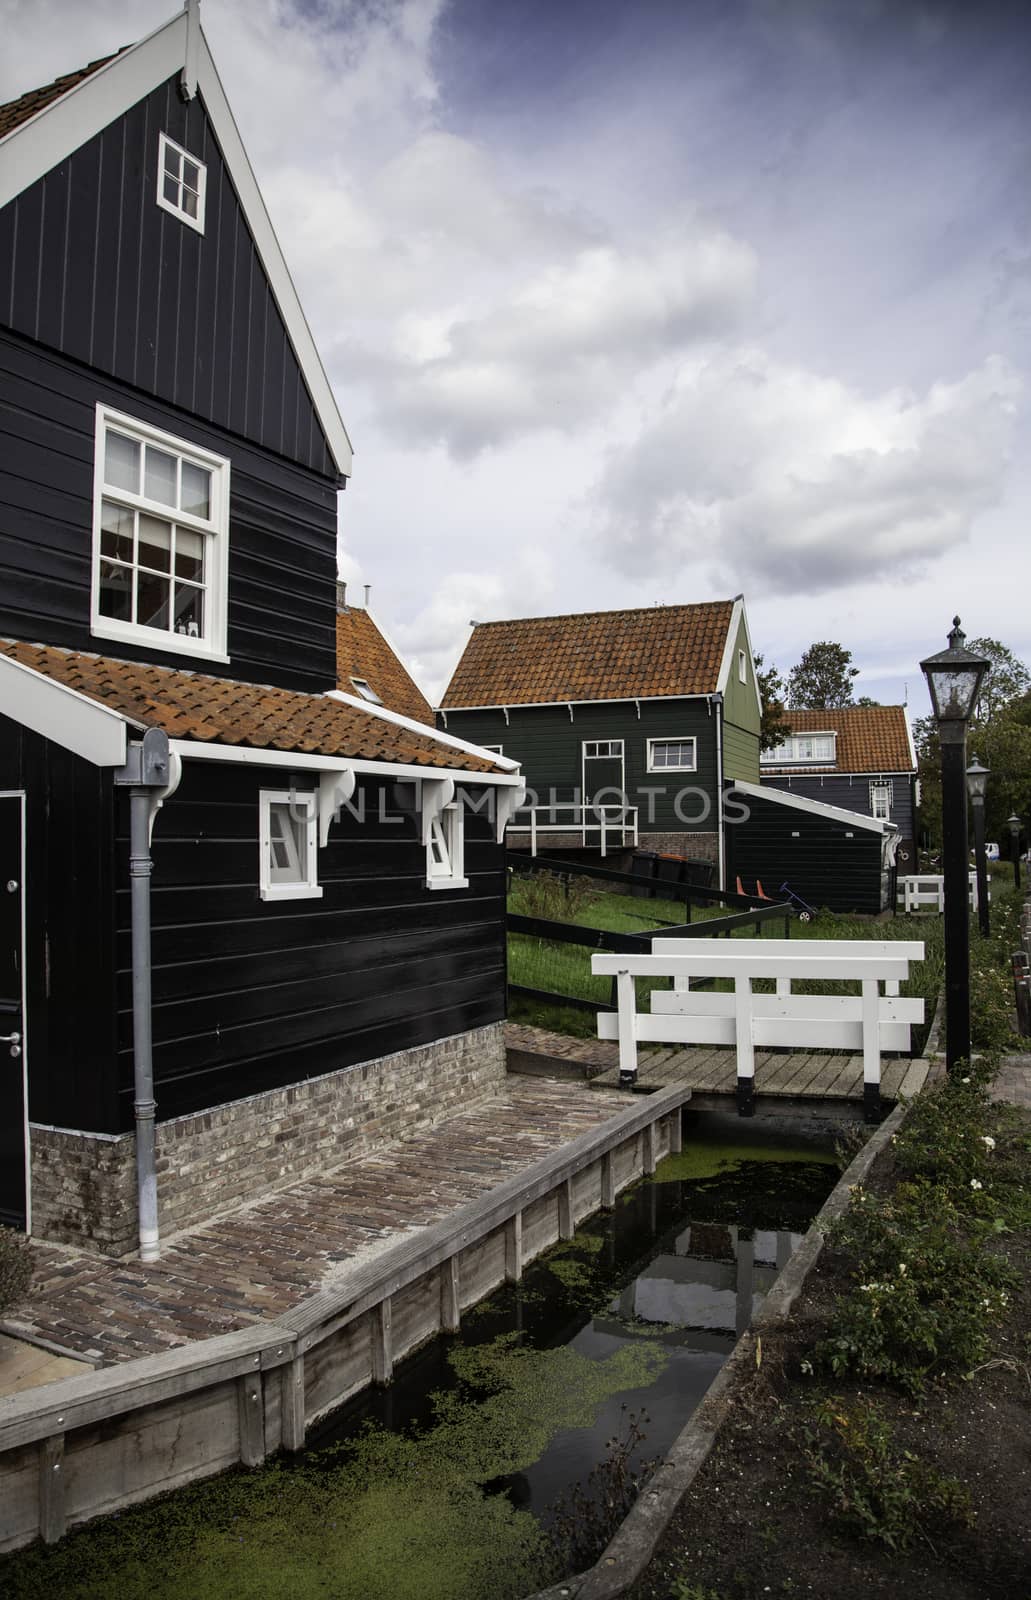 Old Dutch houses, detail of tourism in Europe